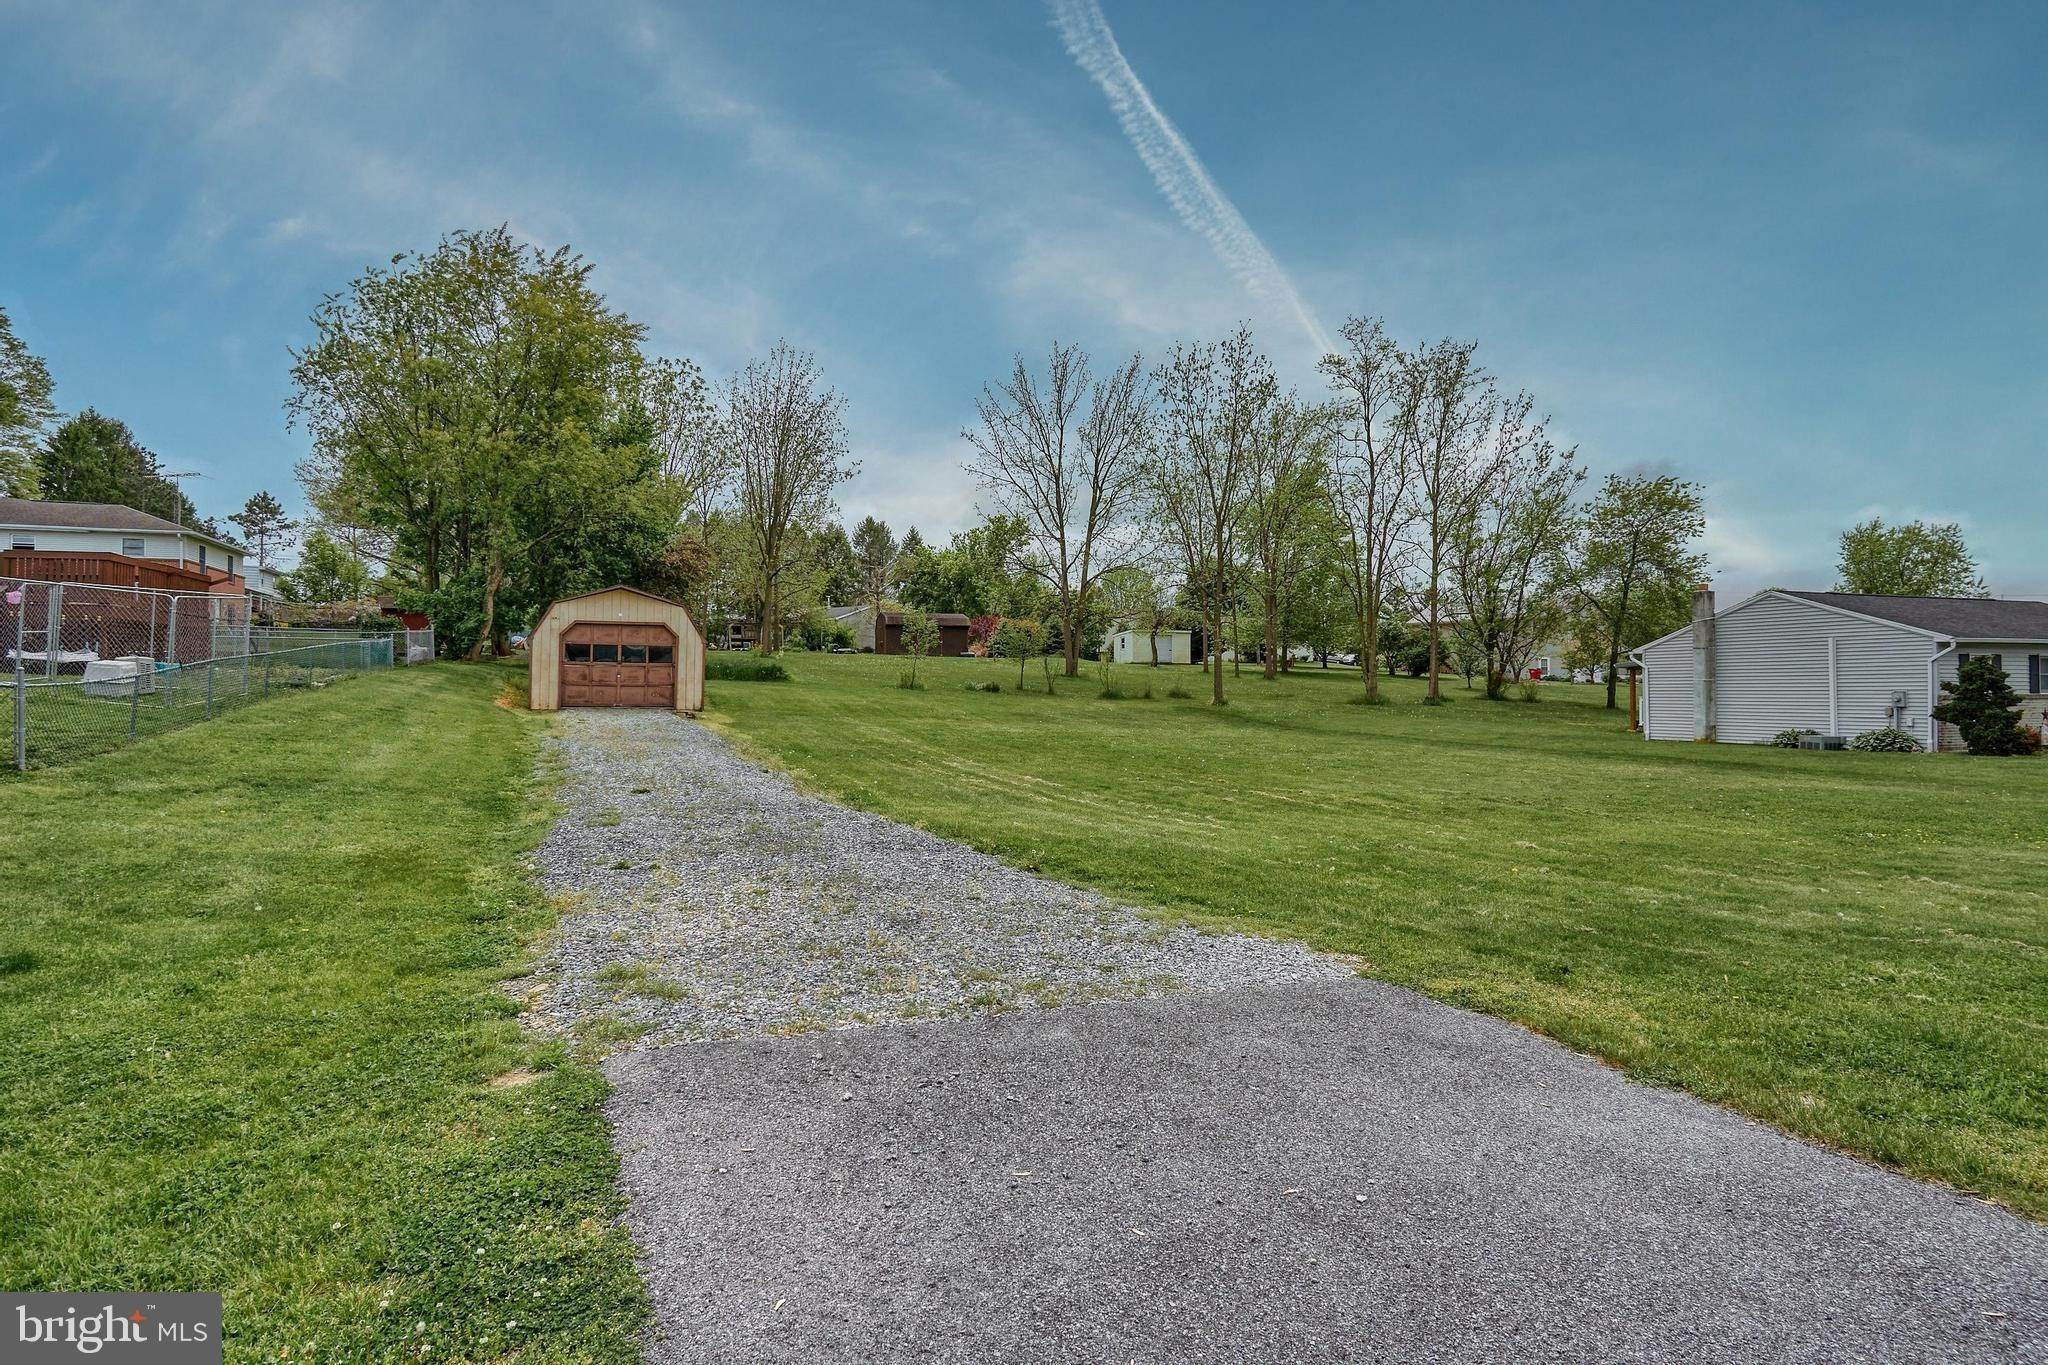 3. Land for Sale at Fayetteville, PA 17222